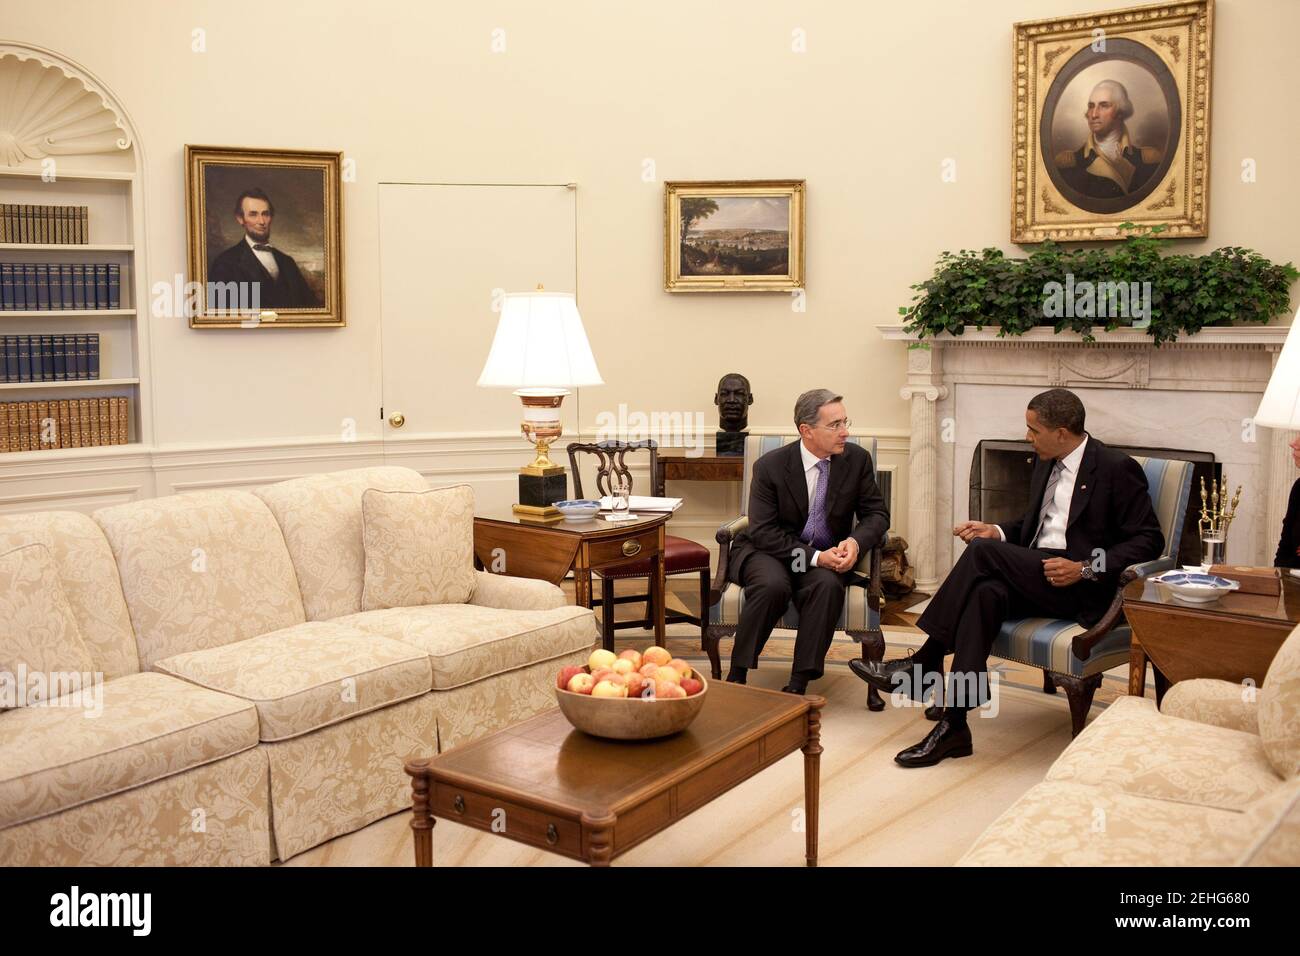 President Barack Obama meets with President Álvaro Uribe of Colombia in the Oval Office of the White House, June 29, 2009. Stock Photo